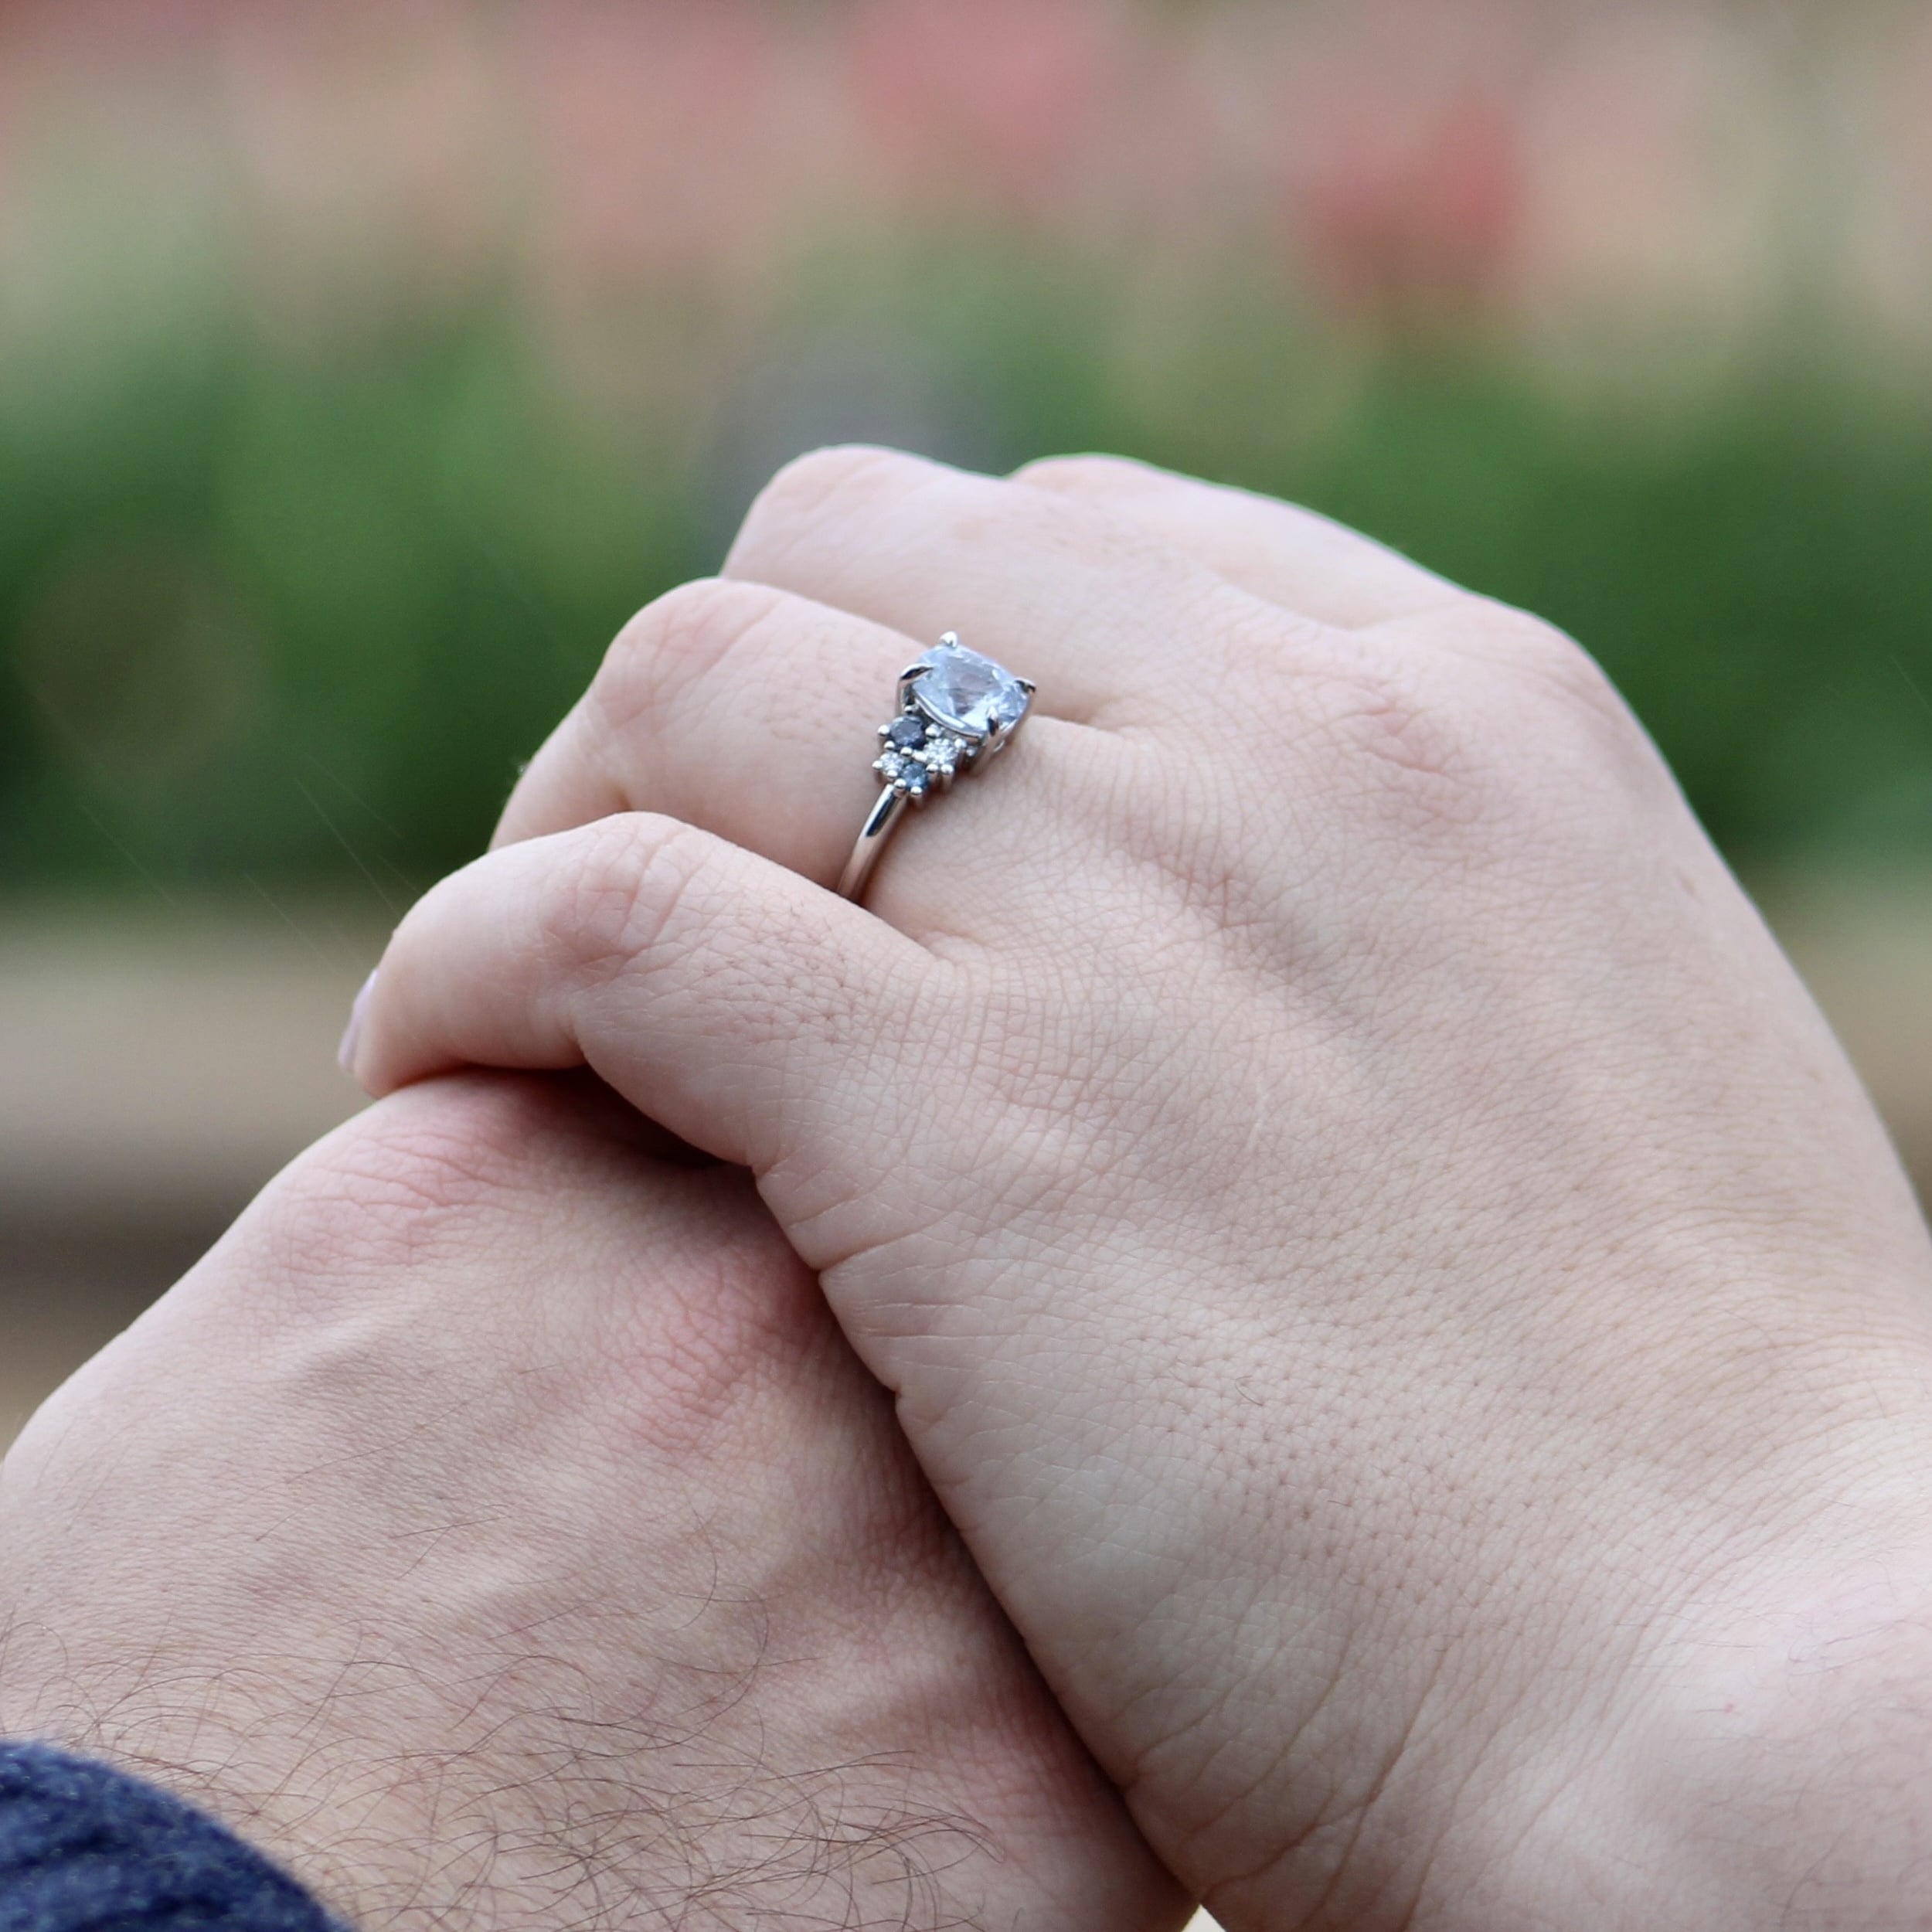 A photo from a customer review featuring a custom "Nebula" ring in platinum with a 2.34-carat Montana sapphire